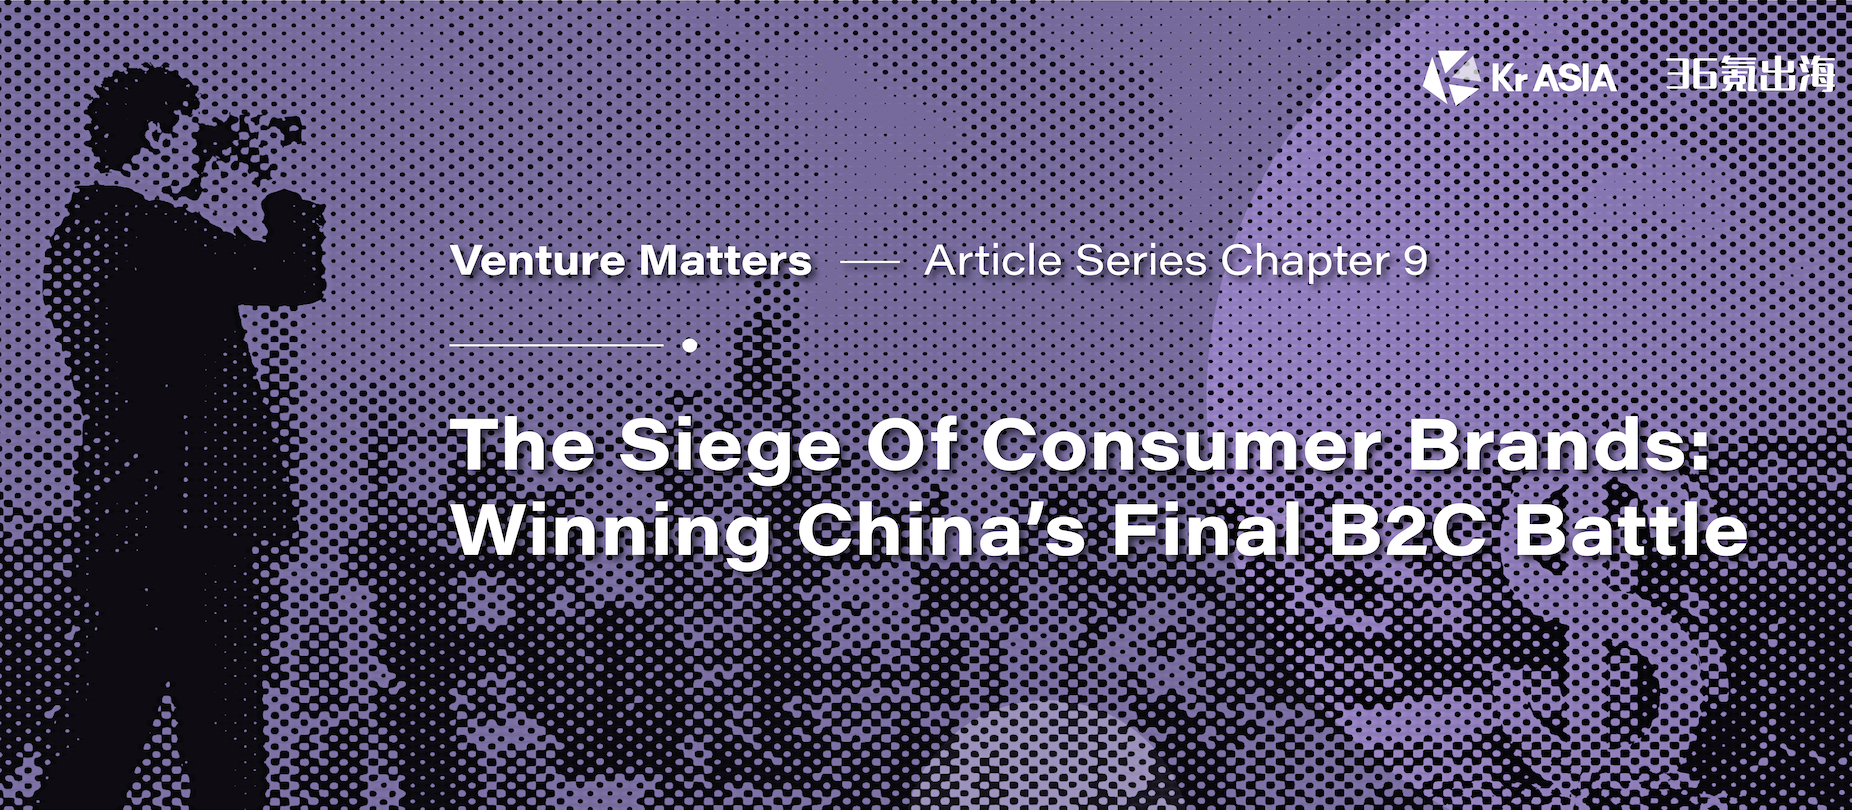 The siege of consumer brands: Winning China’s final B2C battle (Part 1 of 2)